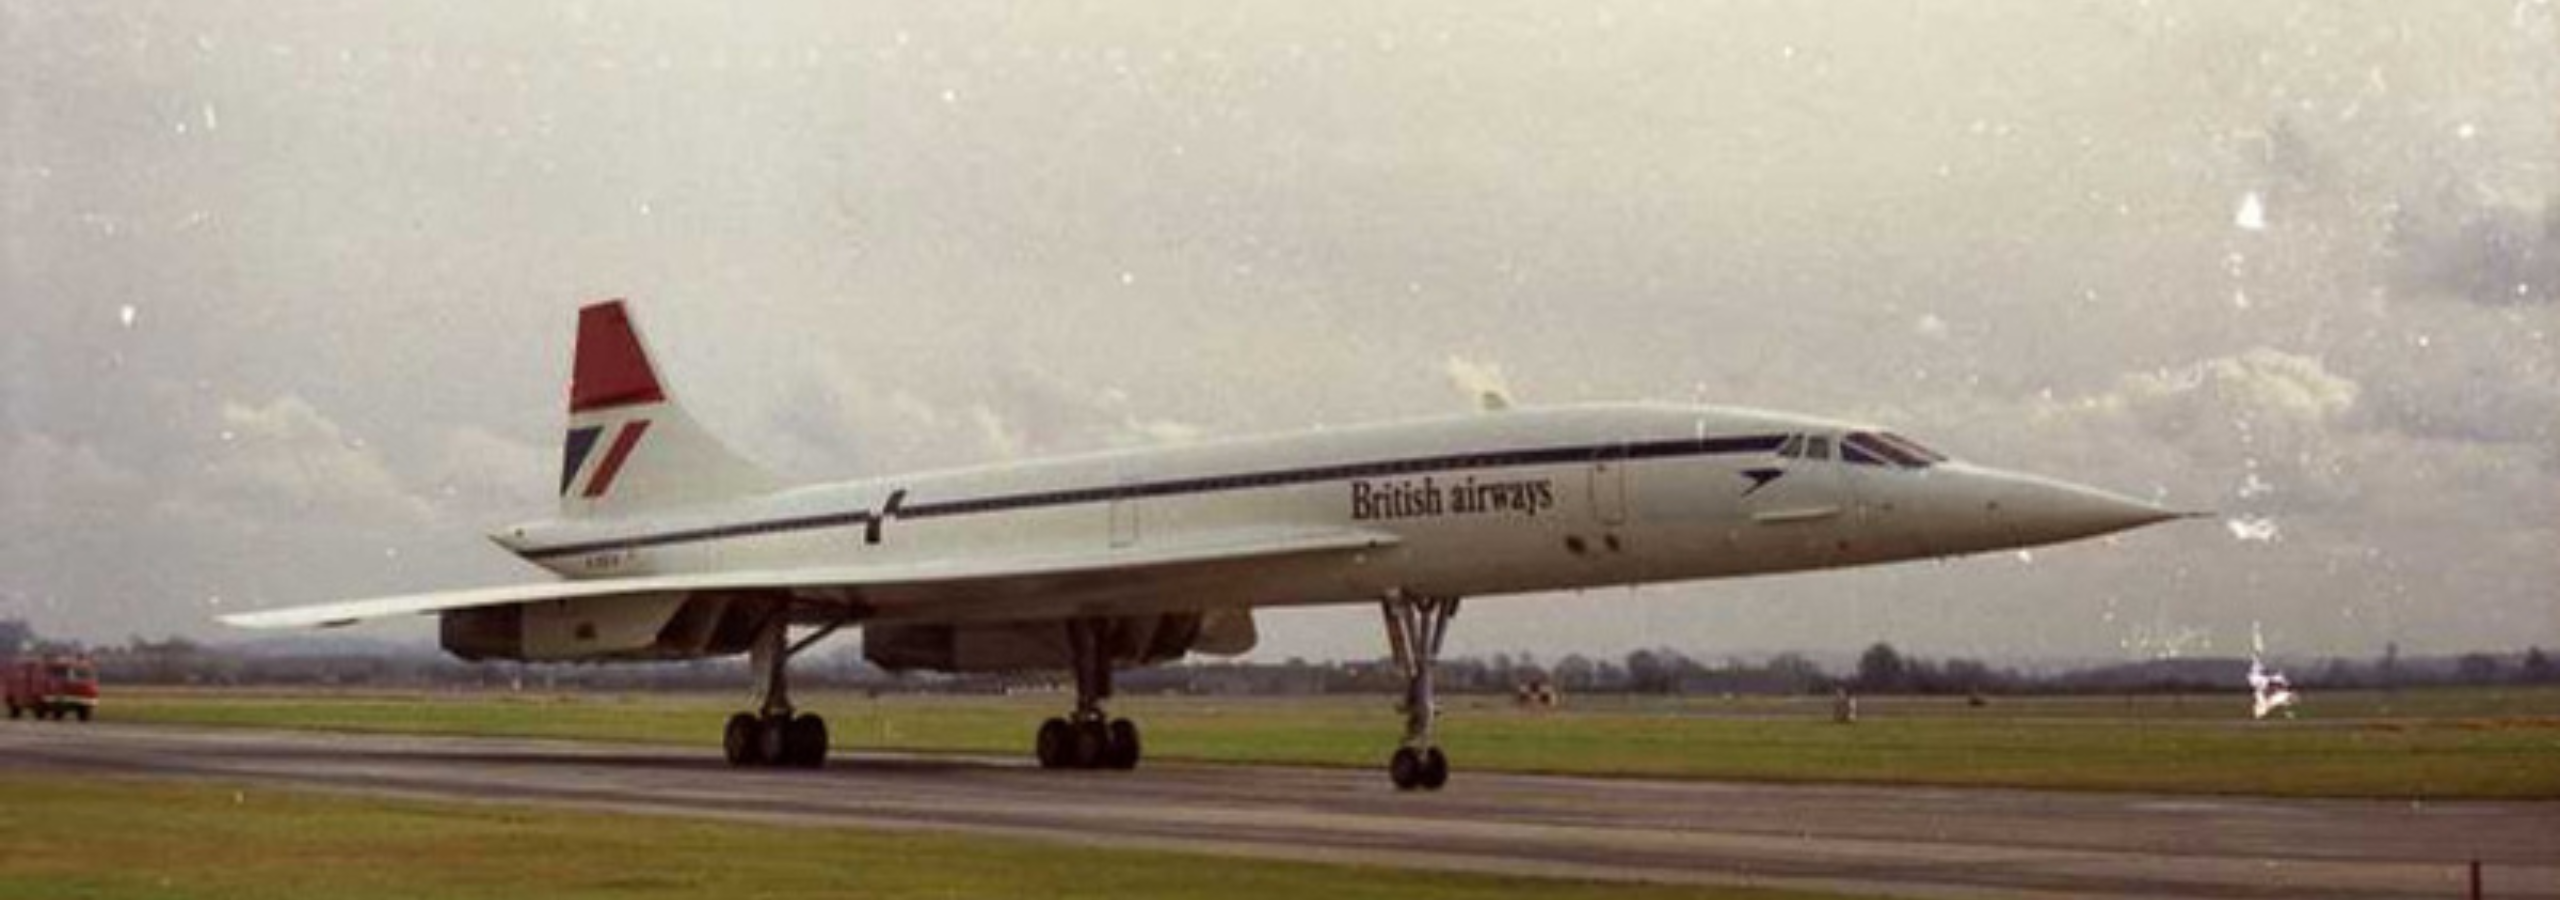 SOLD OUT - G-BBDG 50th Anniversary of first flight panel talk - 13th February